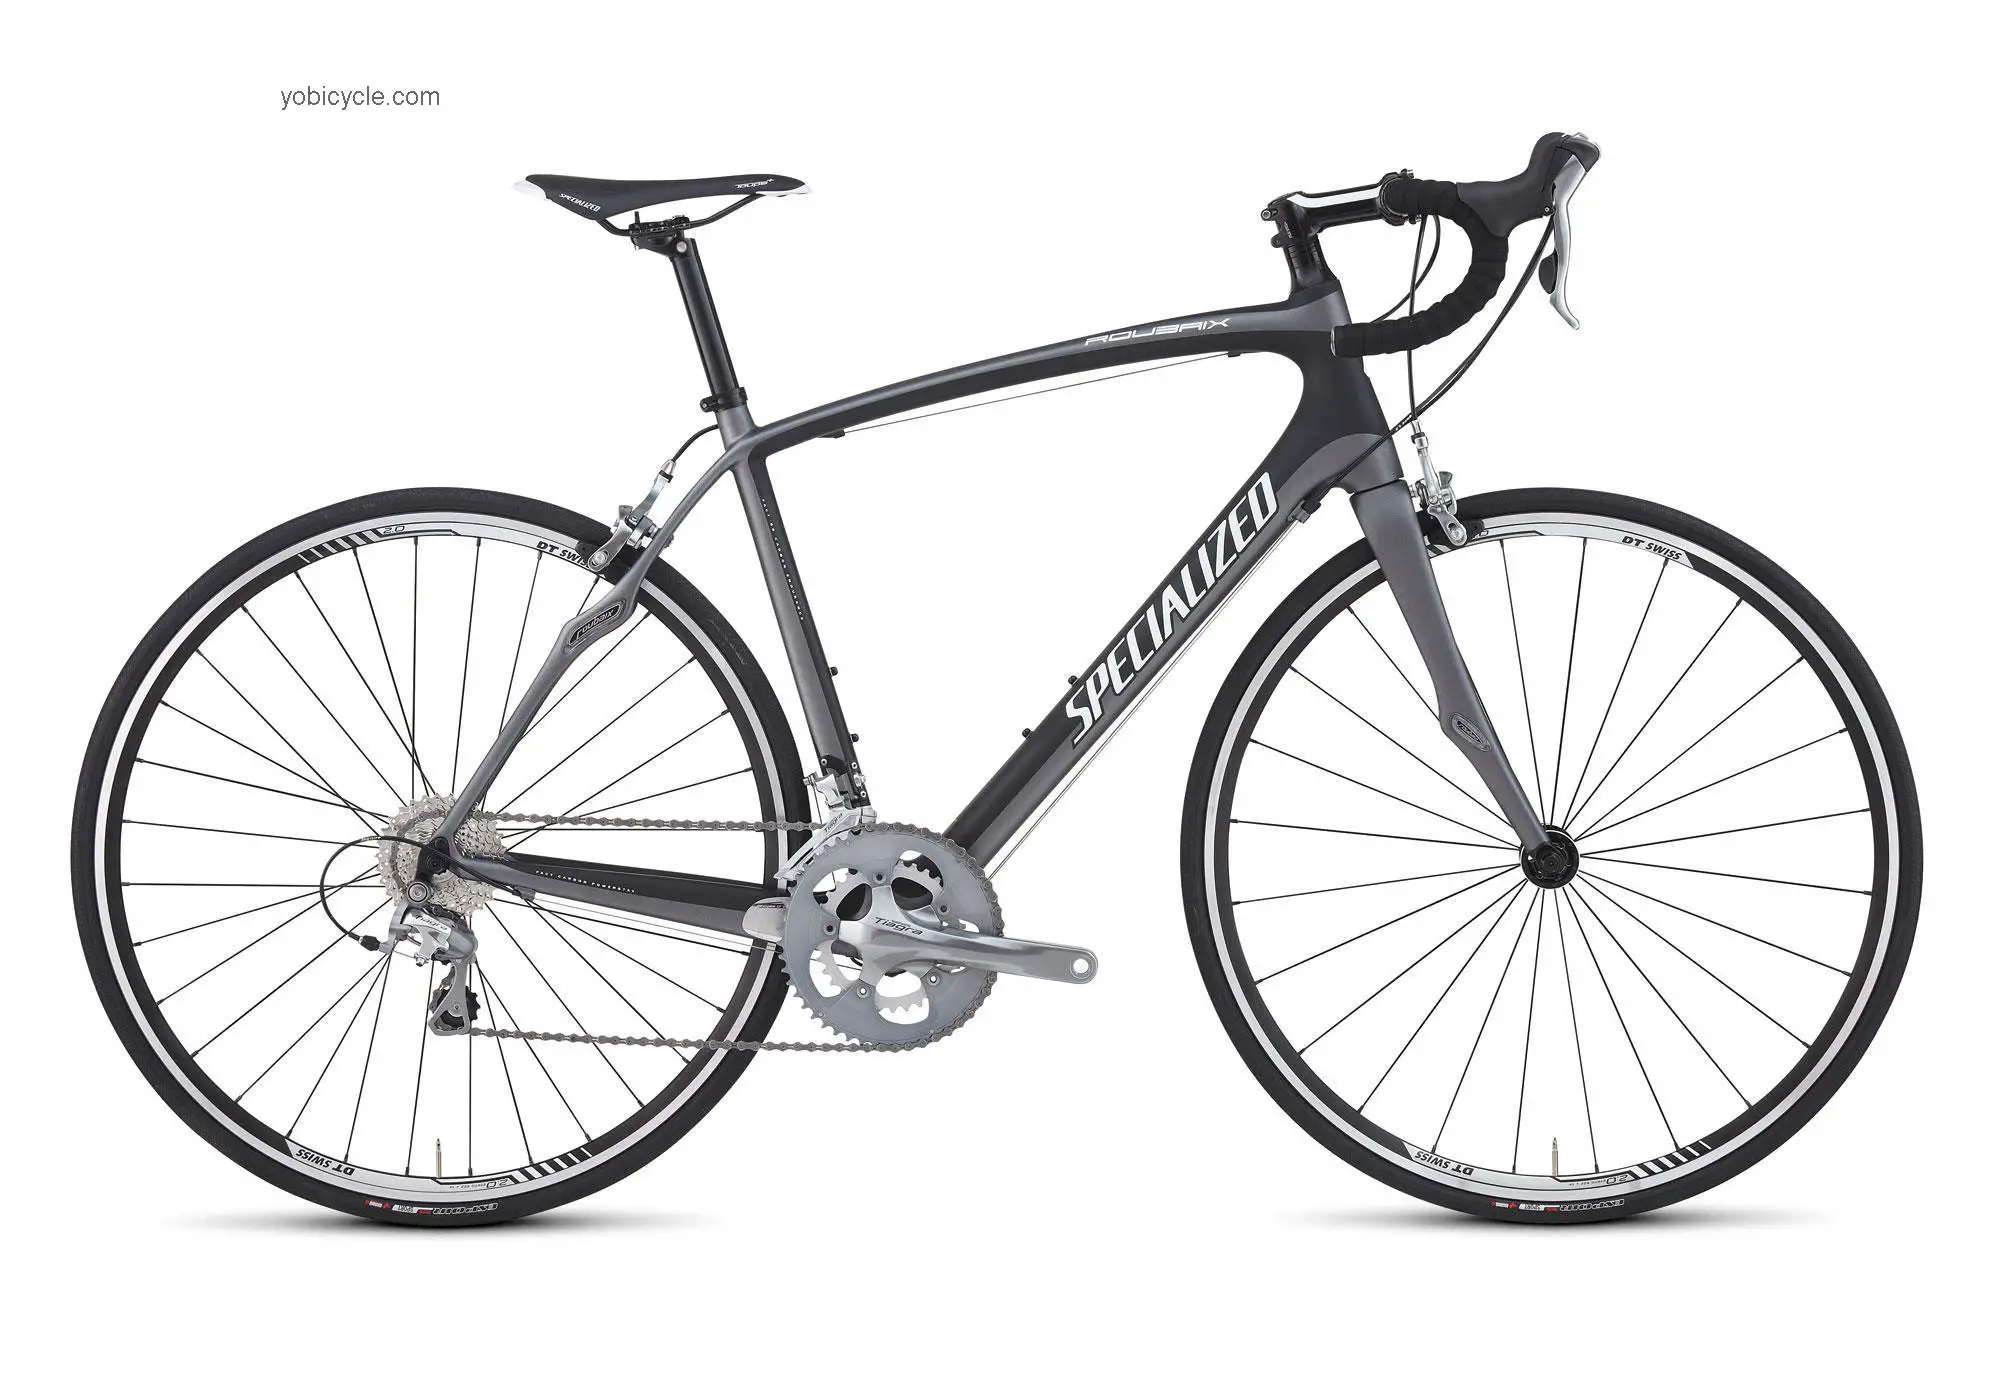 Specialized Roubaix Compact 2012 comparison online with competitors